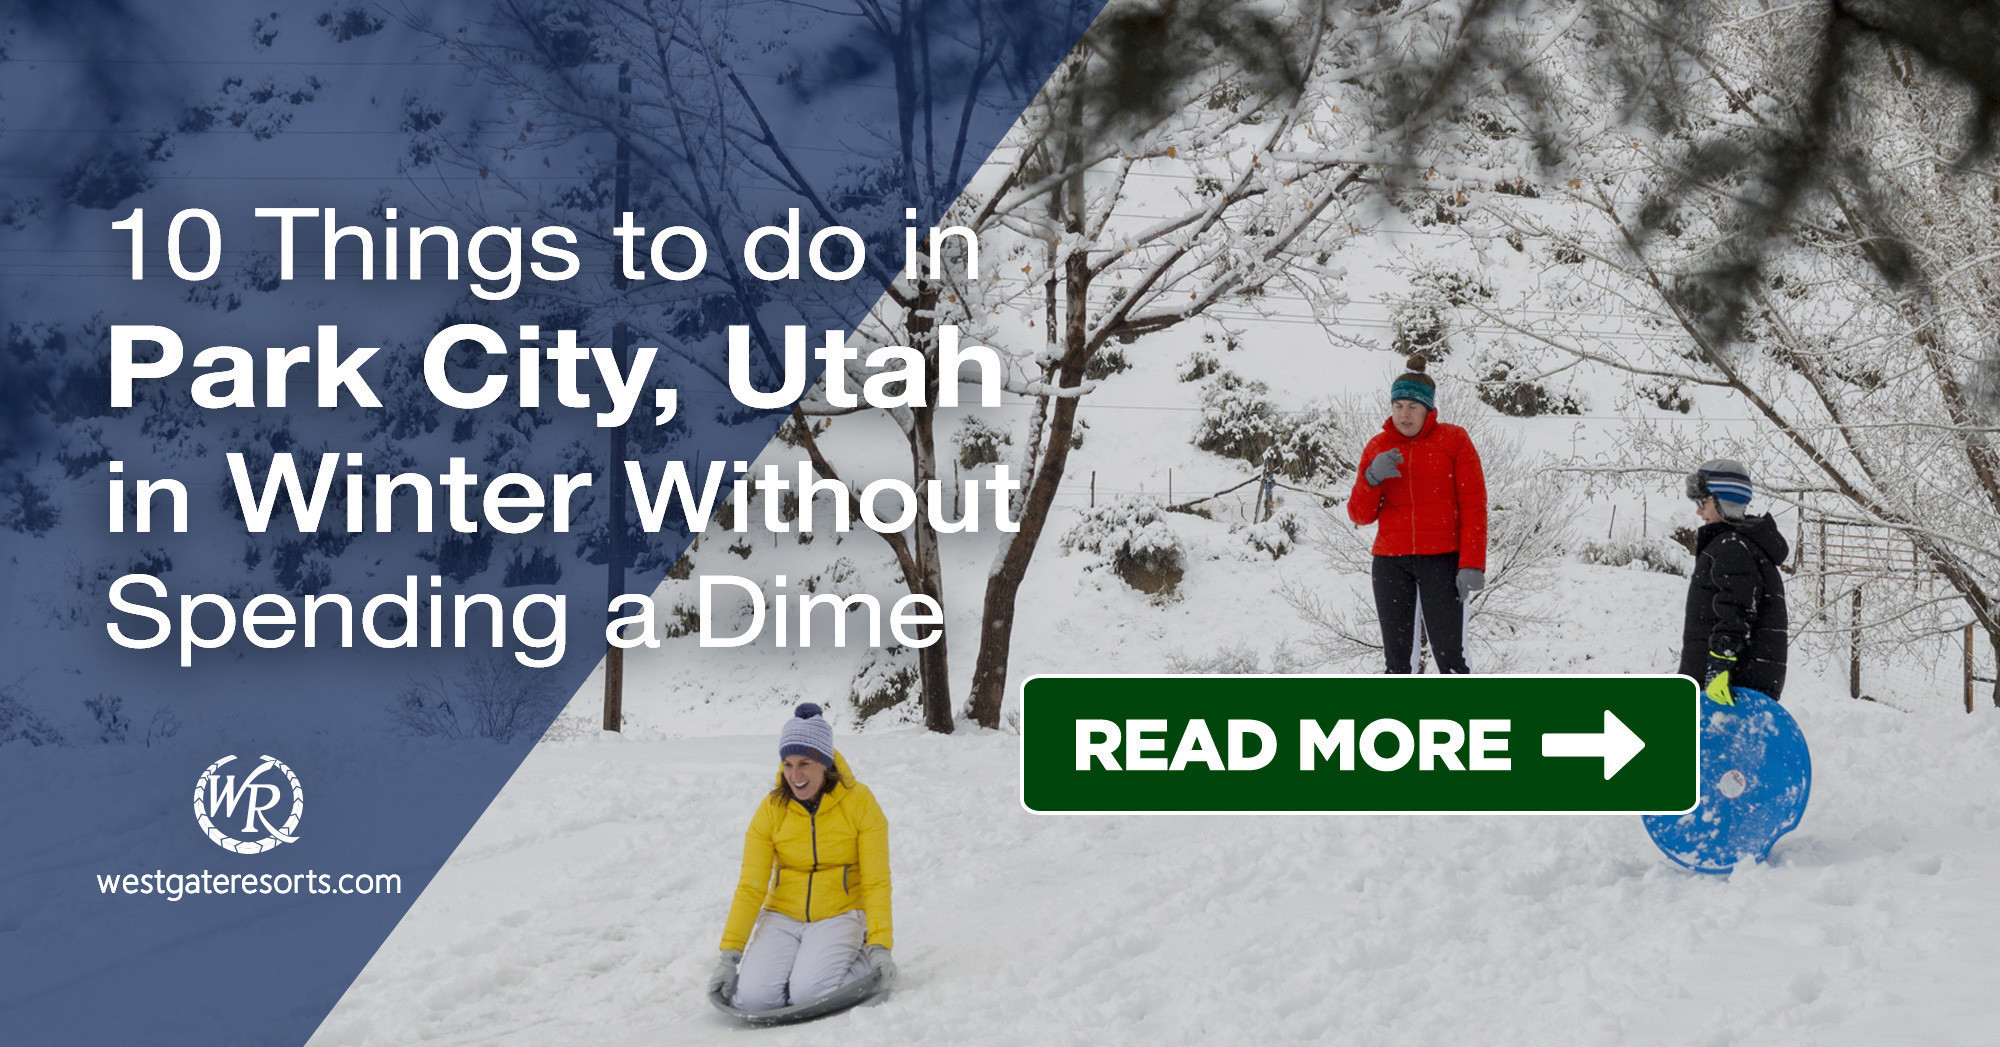 10 Things to do in Park City Utah in Winter Without Spending a Dime